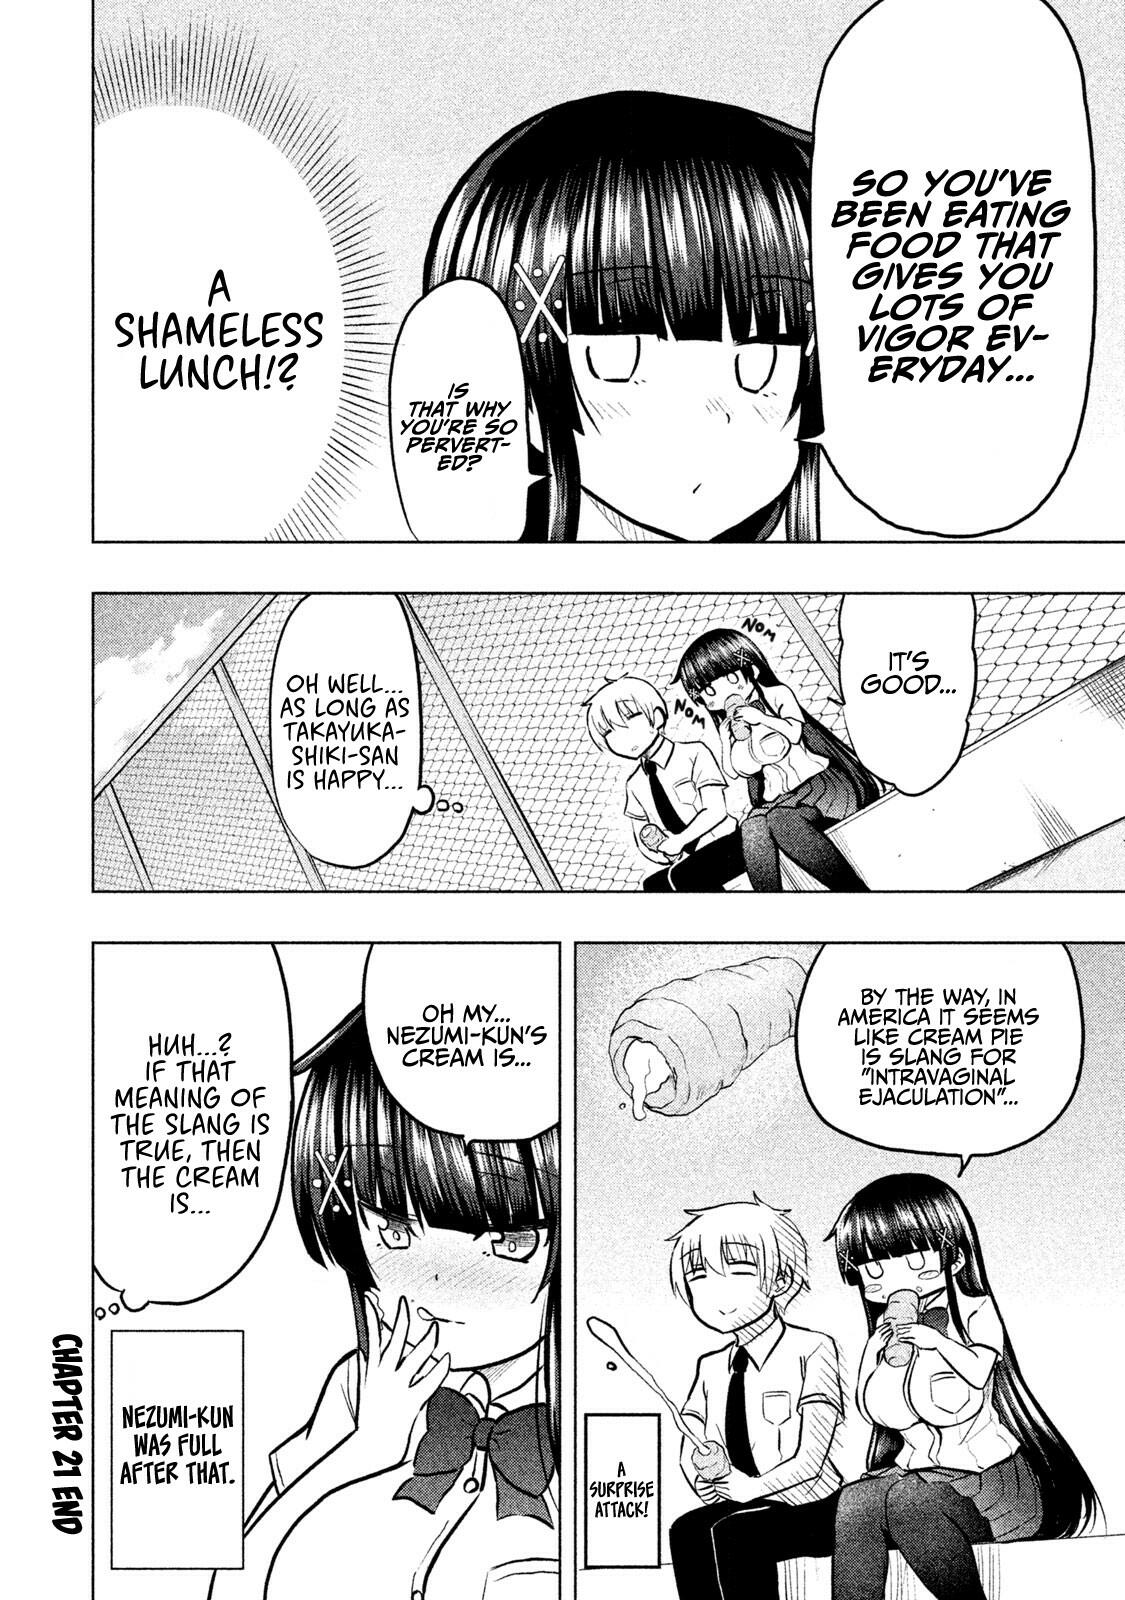 A Girl Who Is Very Well-Informed About Weird Knowledge, Takayukashiki Souko-San Chapter 21: Lunch Box page 9 - Mangakakalots.com